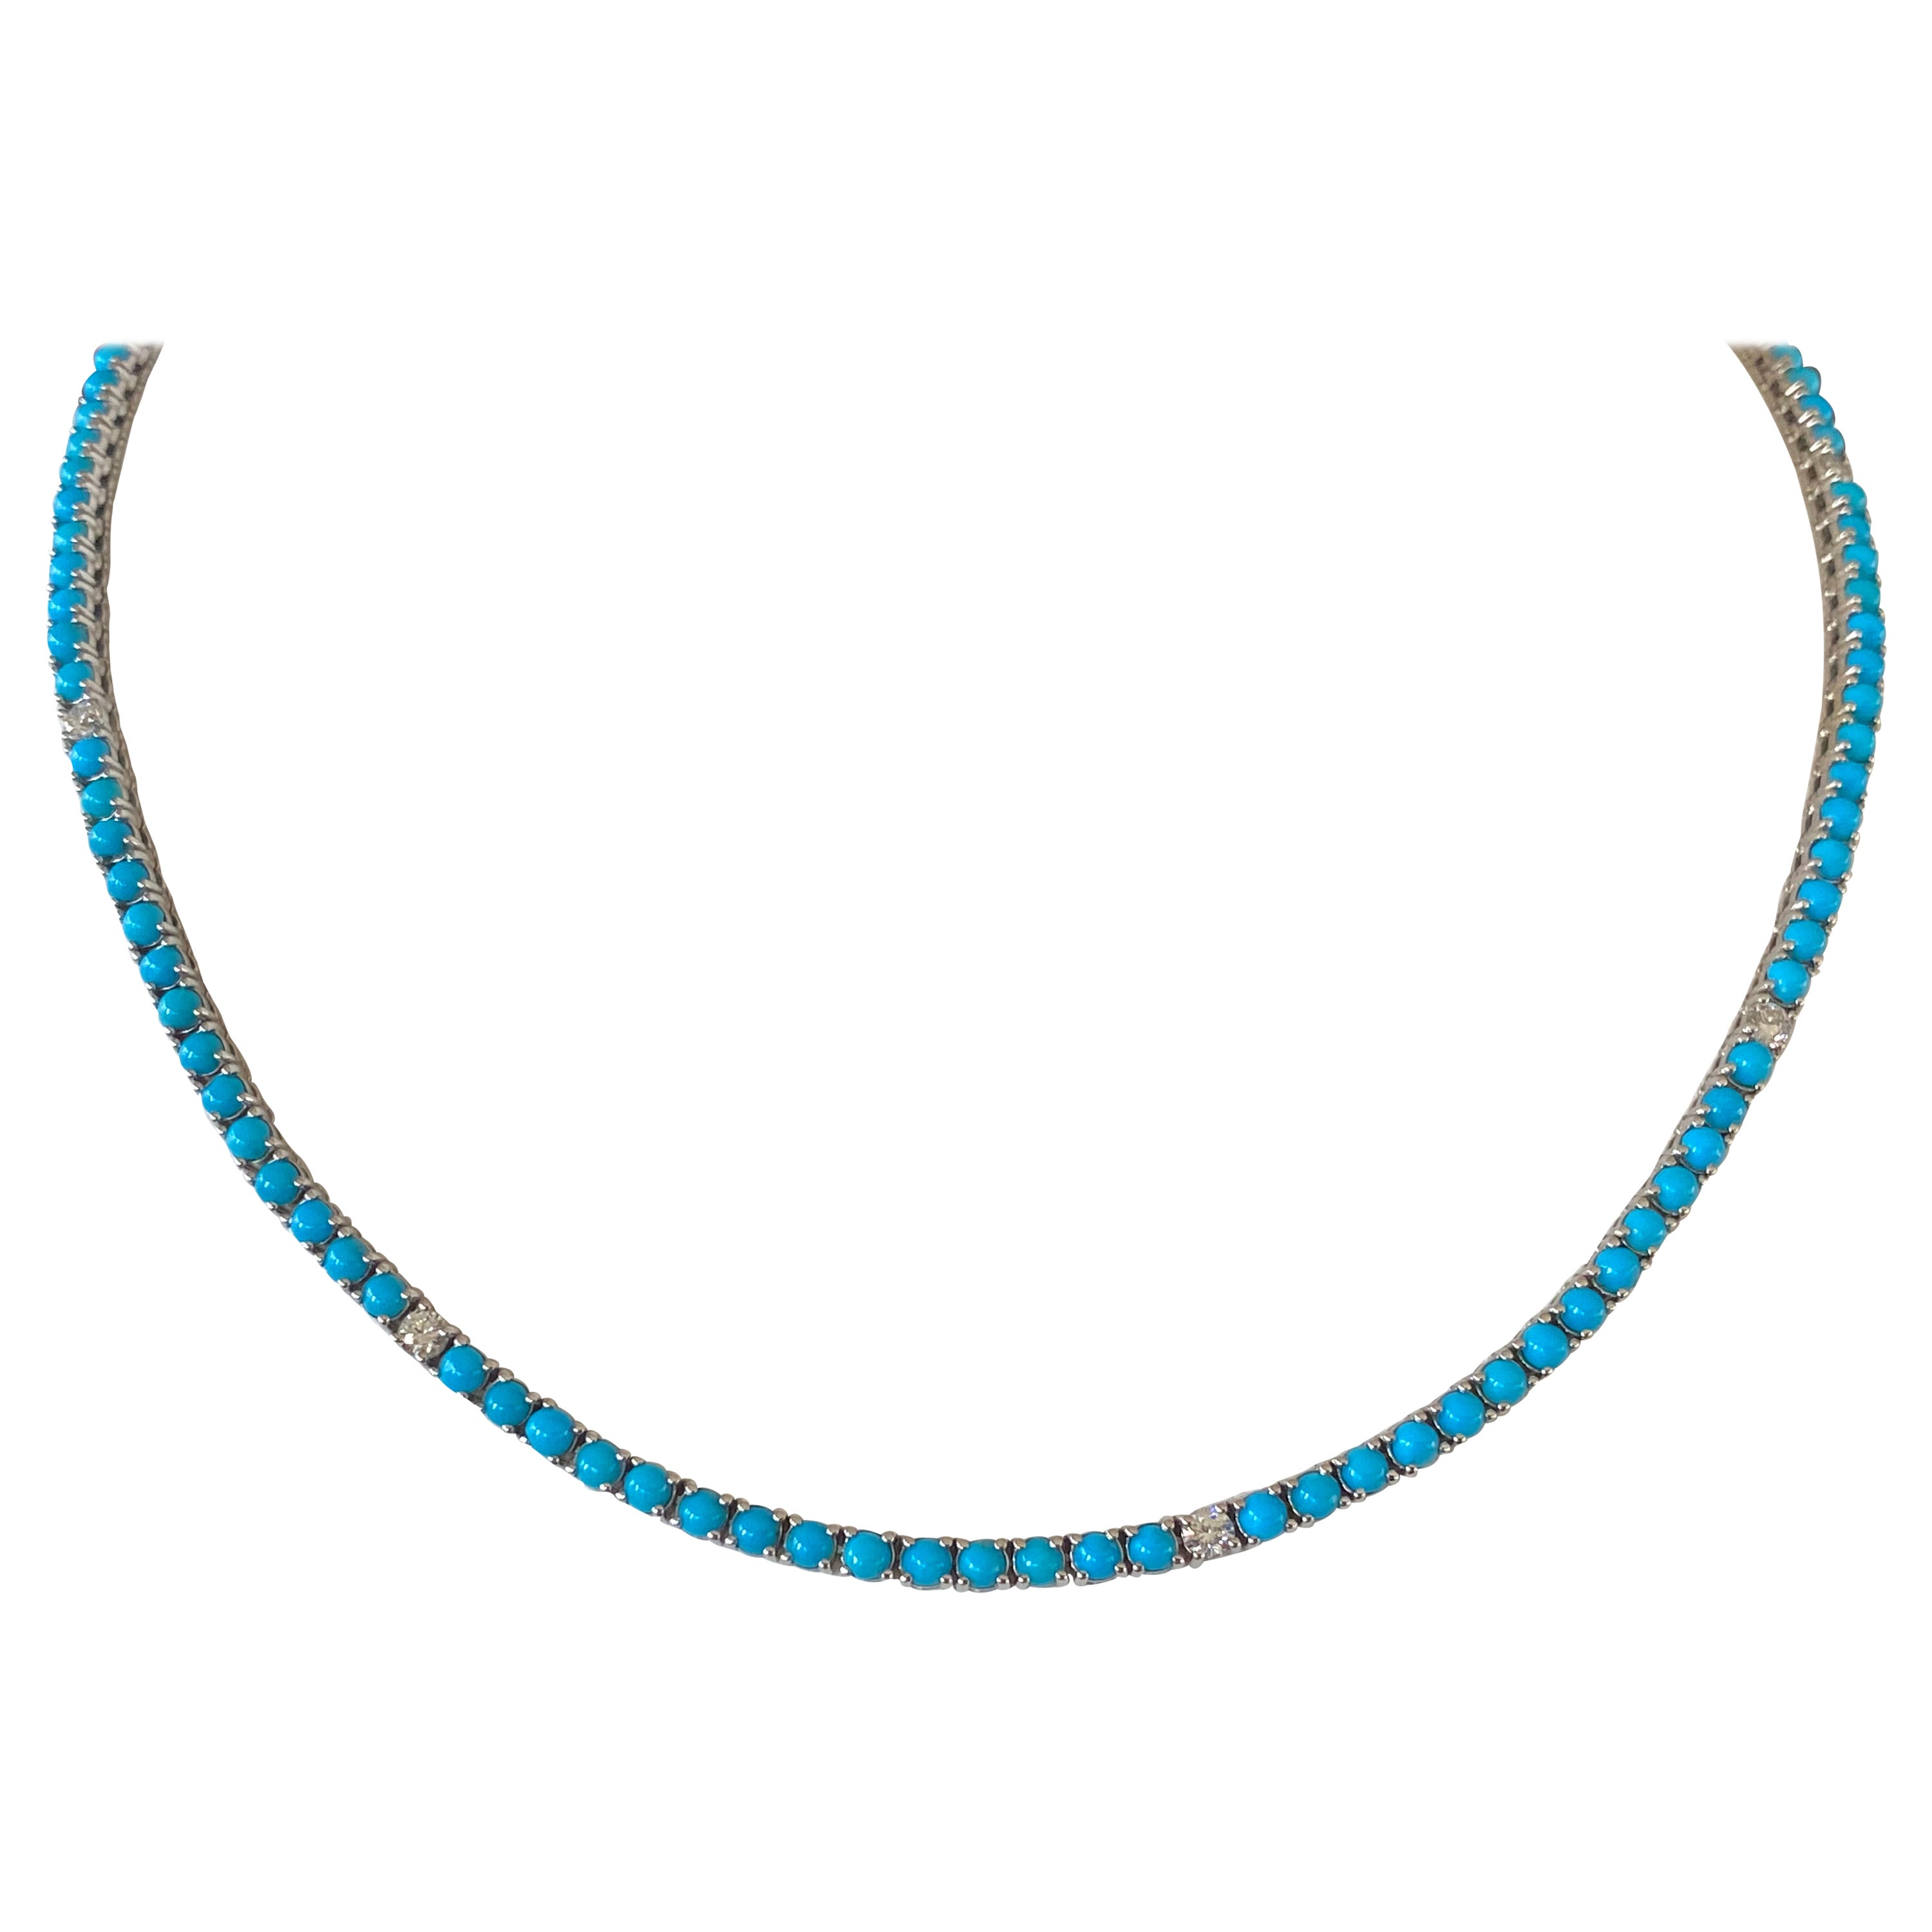 Diamond and Turquoise Tennis Necklace